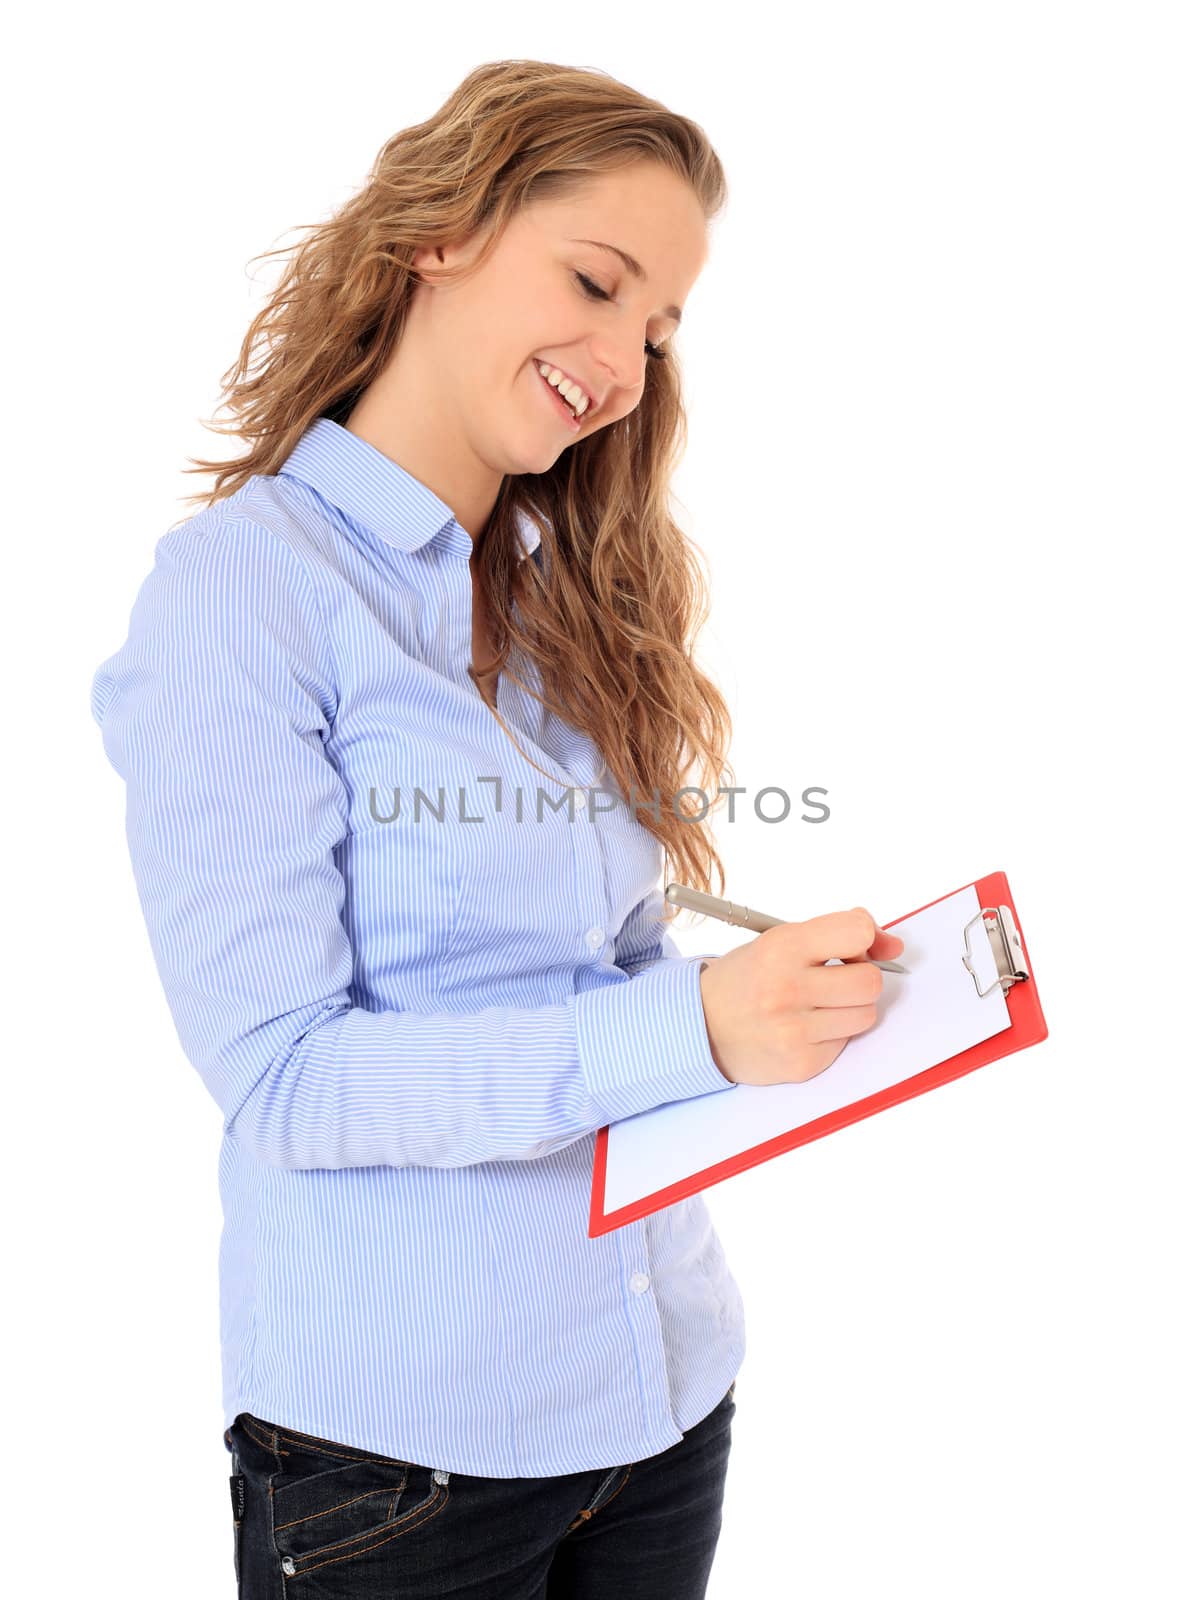 Portrait of an attractive young girl writing on a clipboard. All on white background.